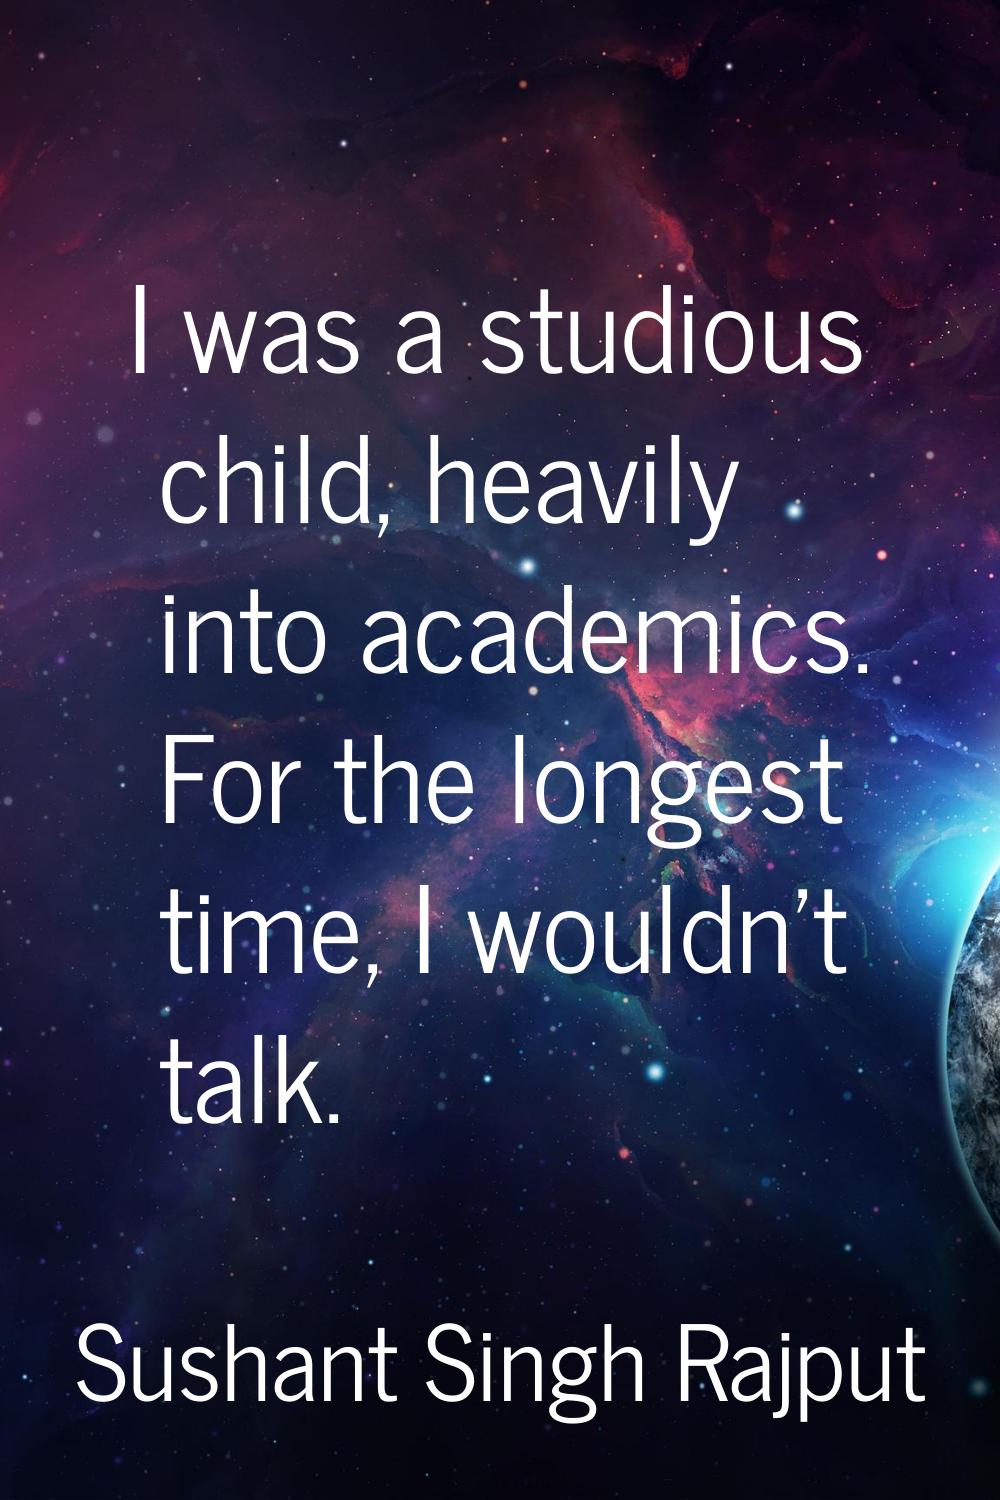 I was a studious child, heavily into academics. For the longest time, I wouldn't talk.